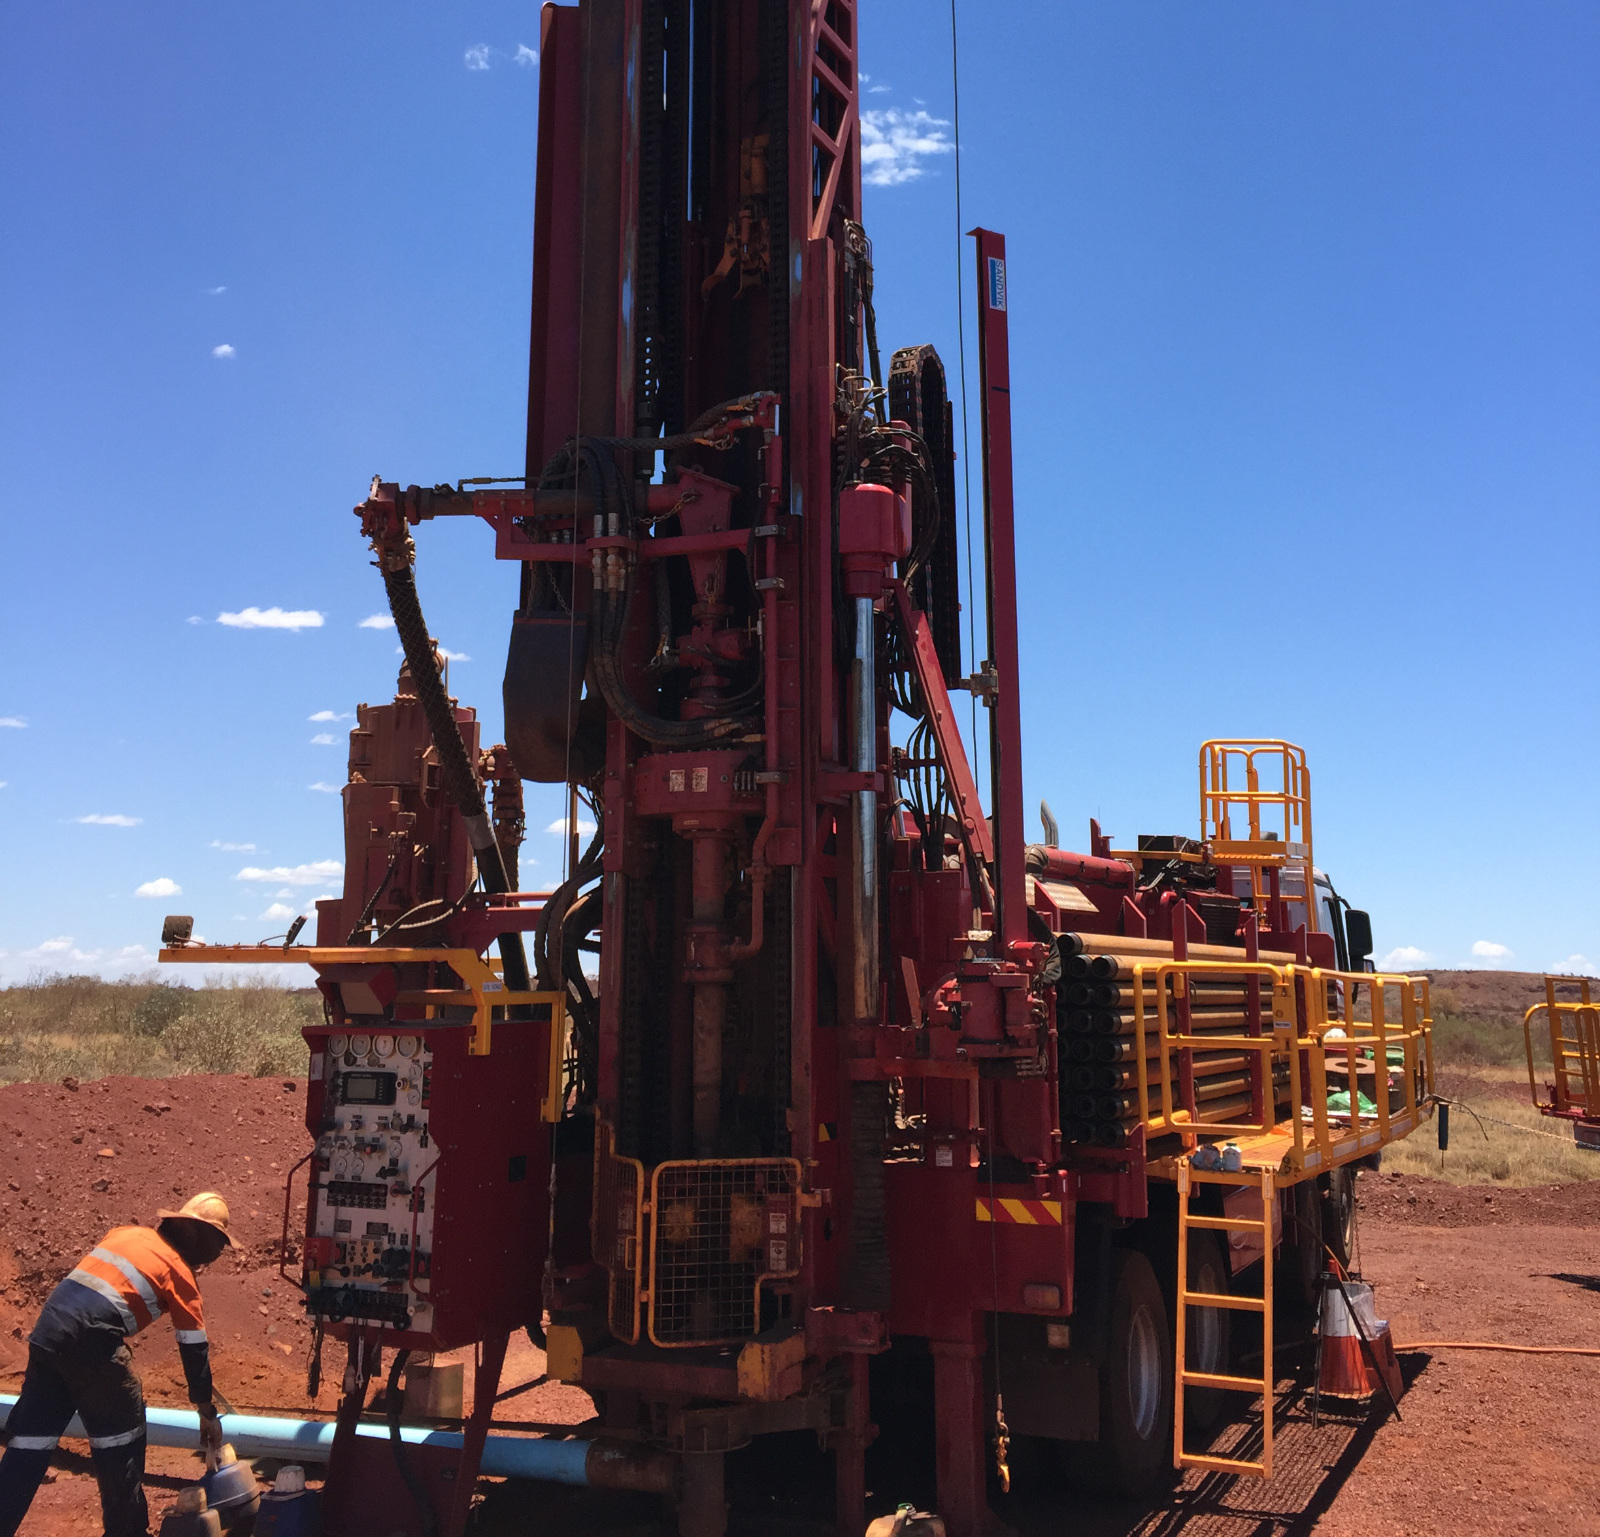 Schramm T685 Series Drill Rig on-site on a clear day.